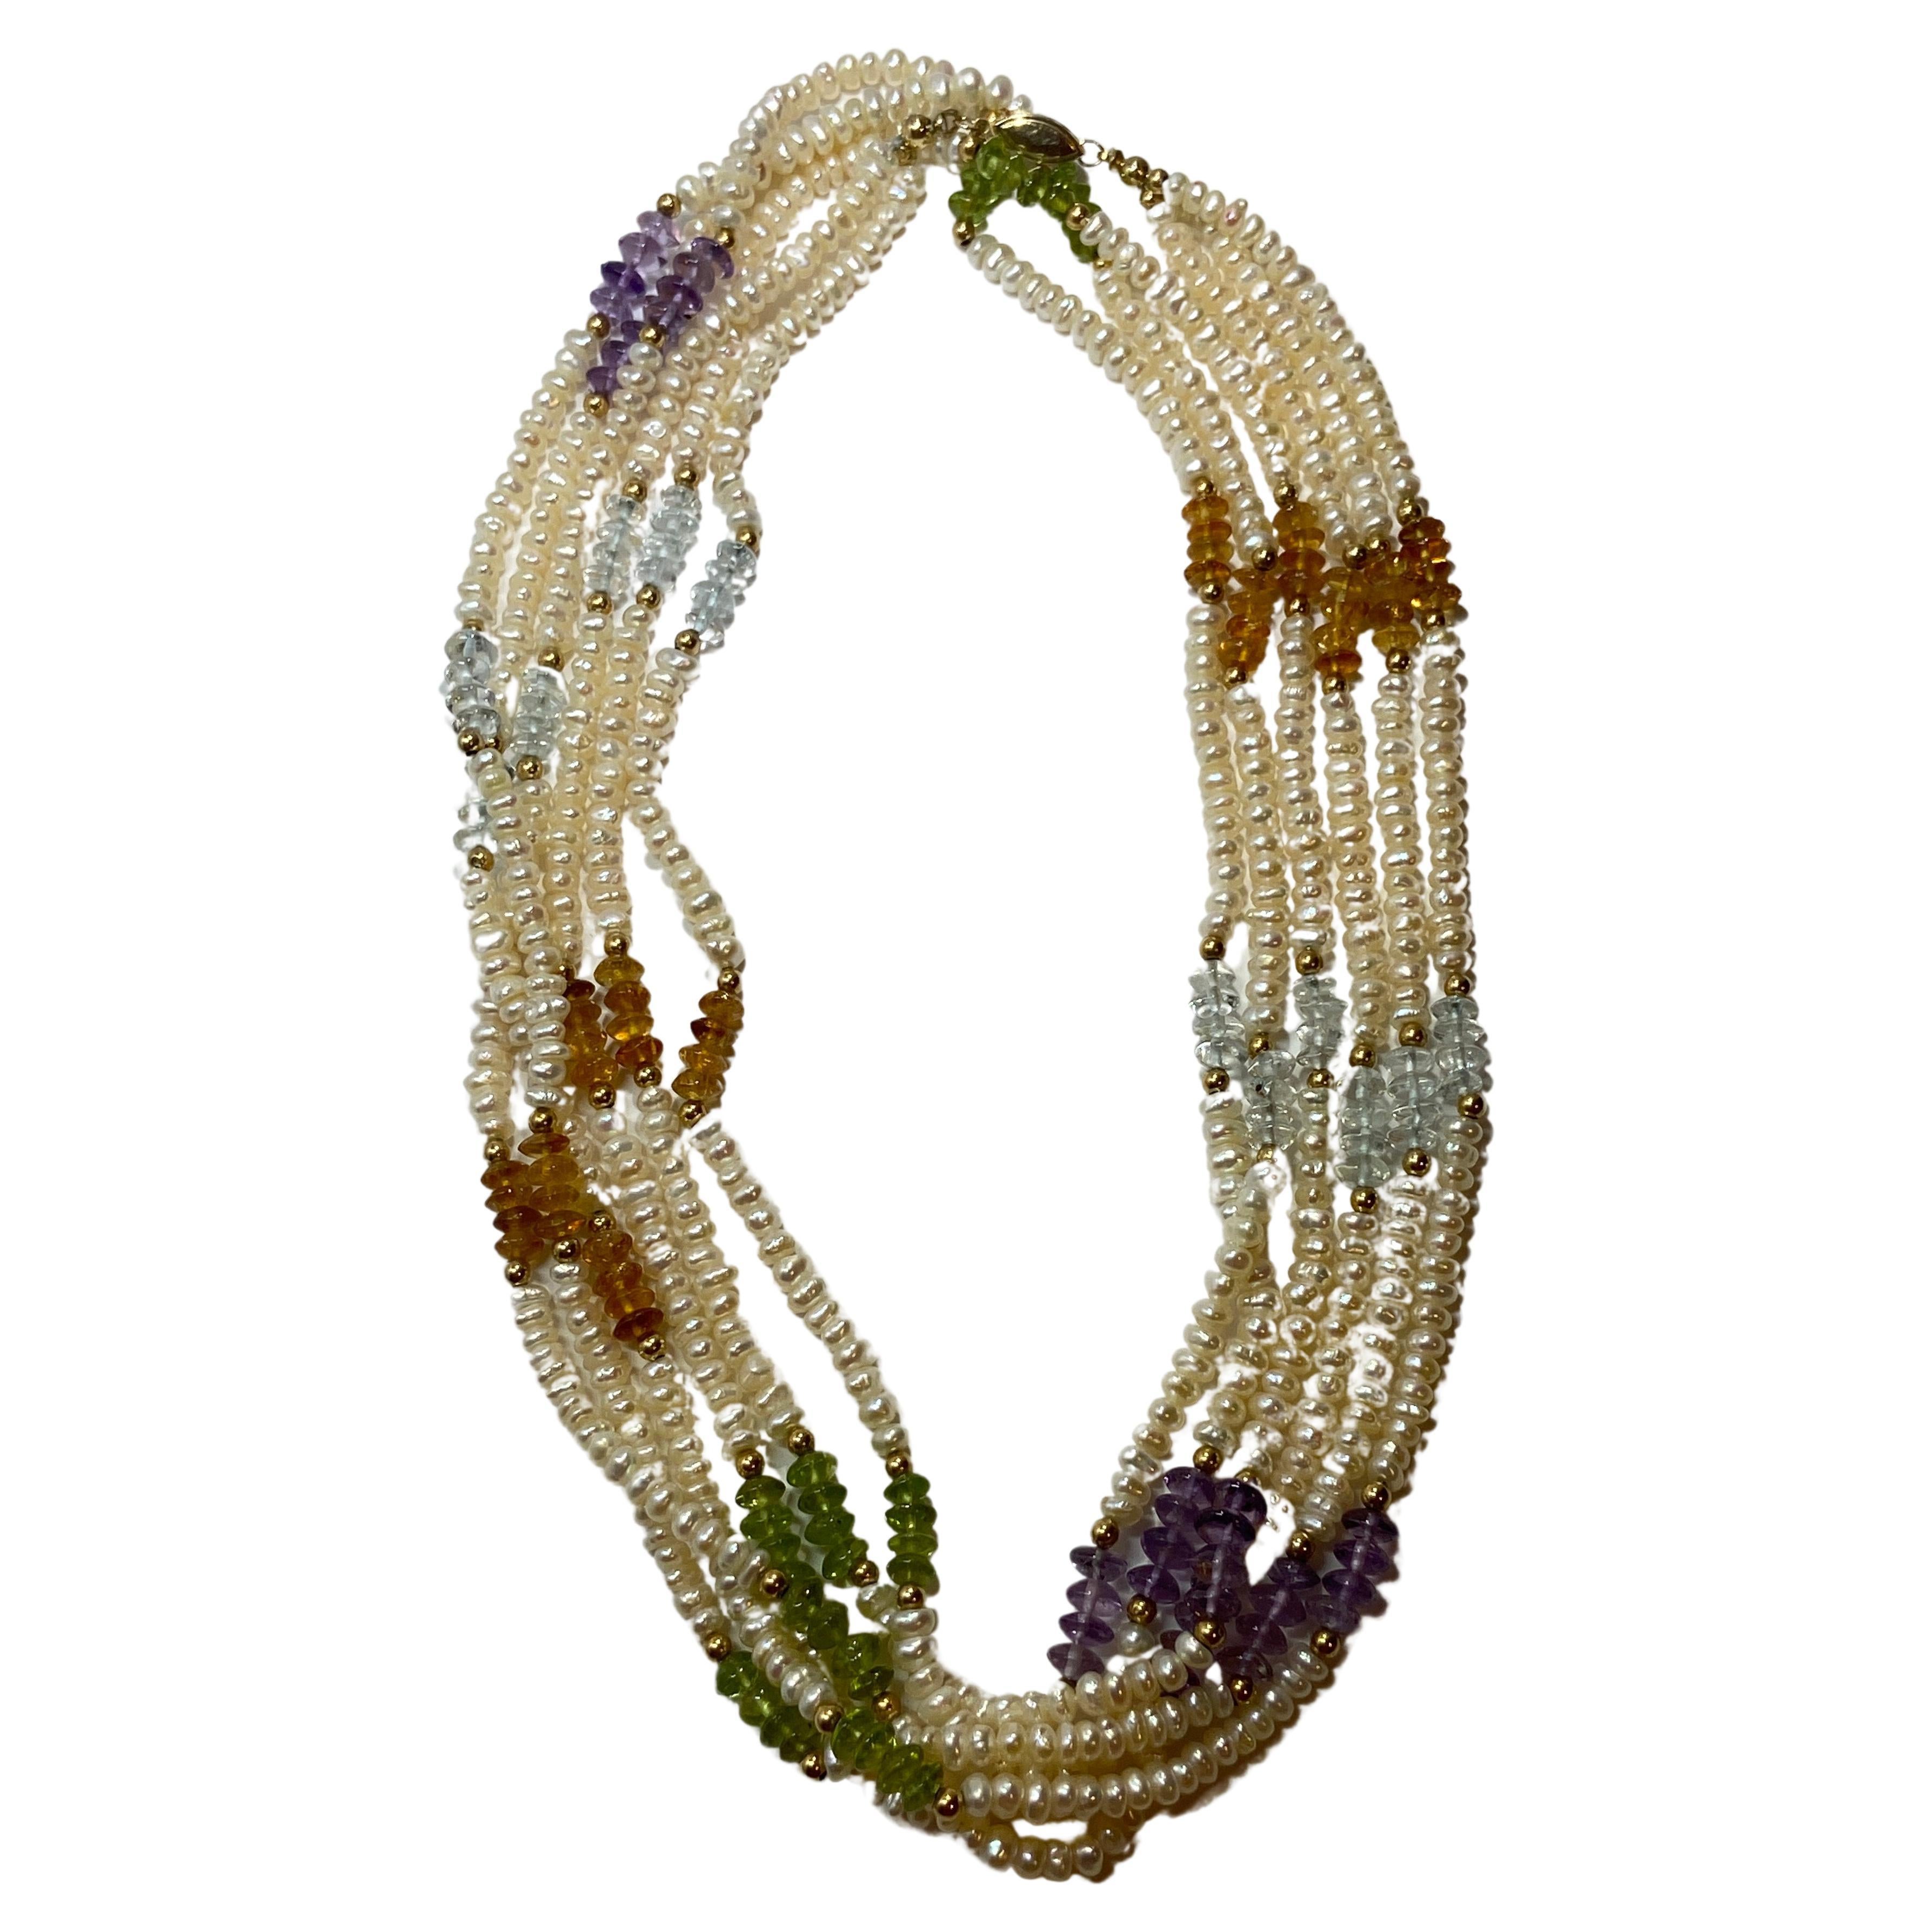 Triple-Strand Pearls with Semi-Precious Stones And Gold Hardware Necklace